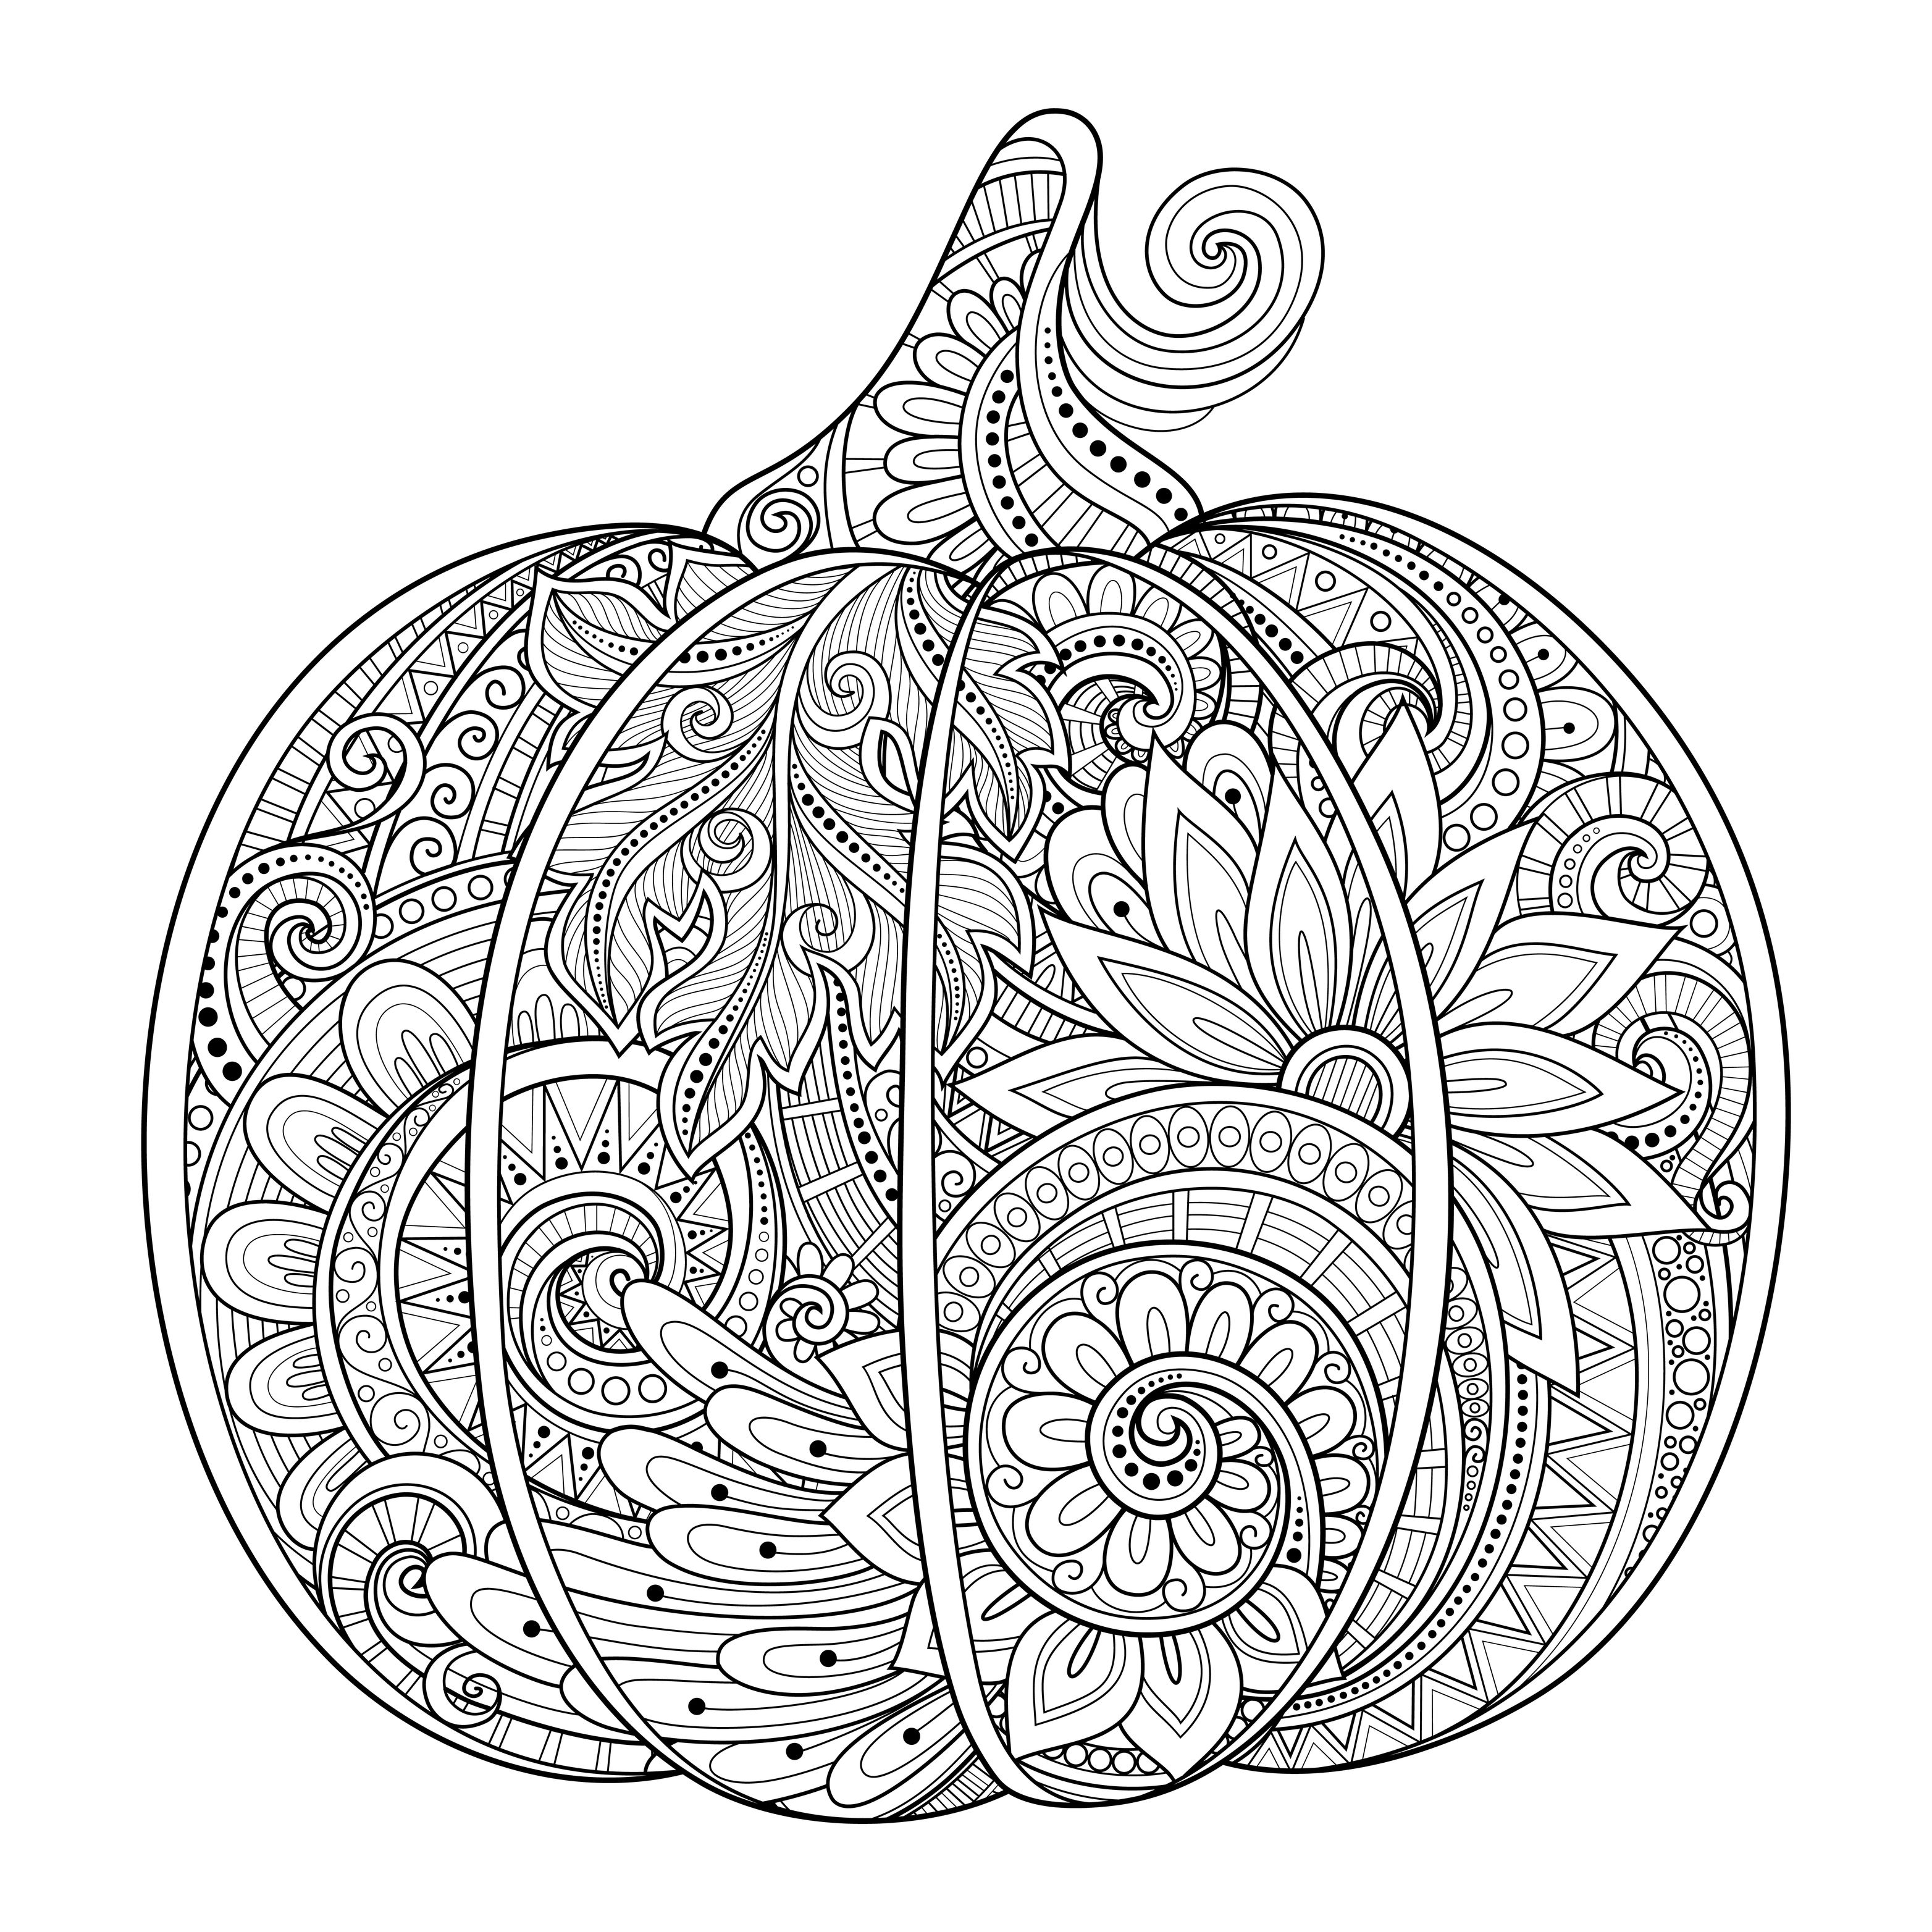 Color this beautiful Halloween coloring page with your favorite colors